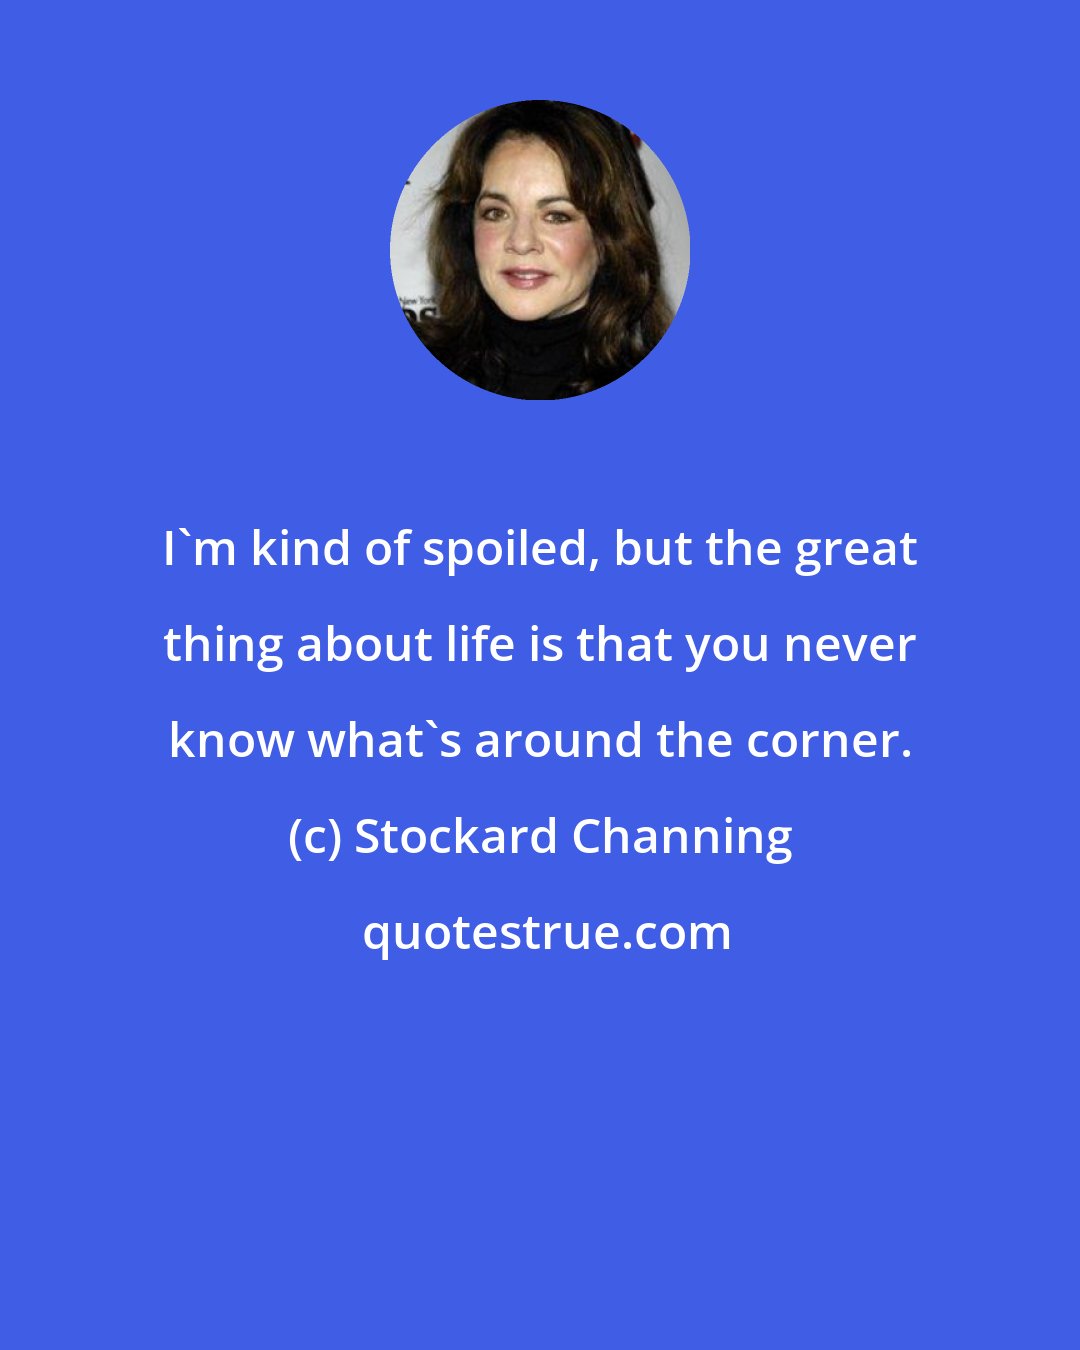 Stockard Channing: I'm kind of spoiled, but the great thing about life is that you never know what's around the corner.